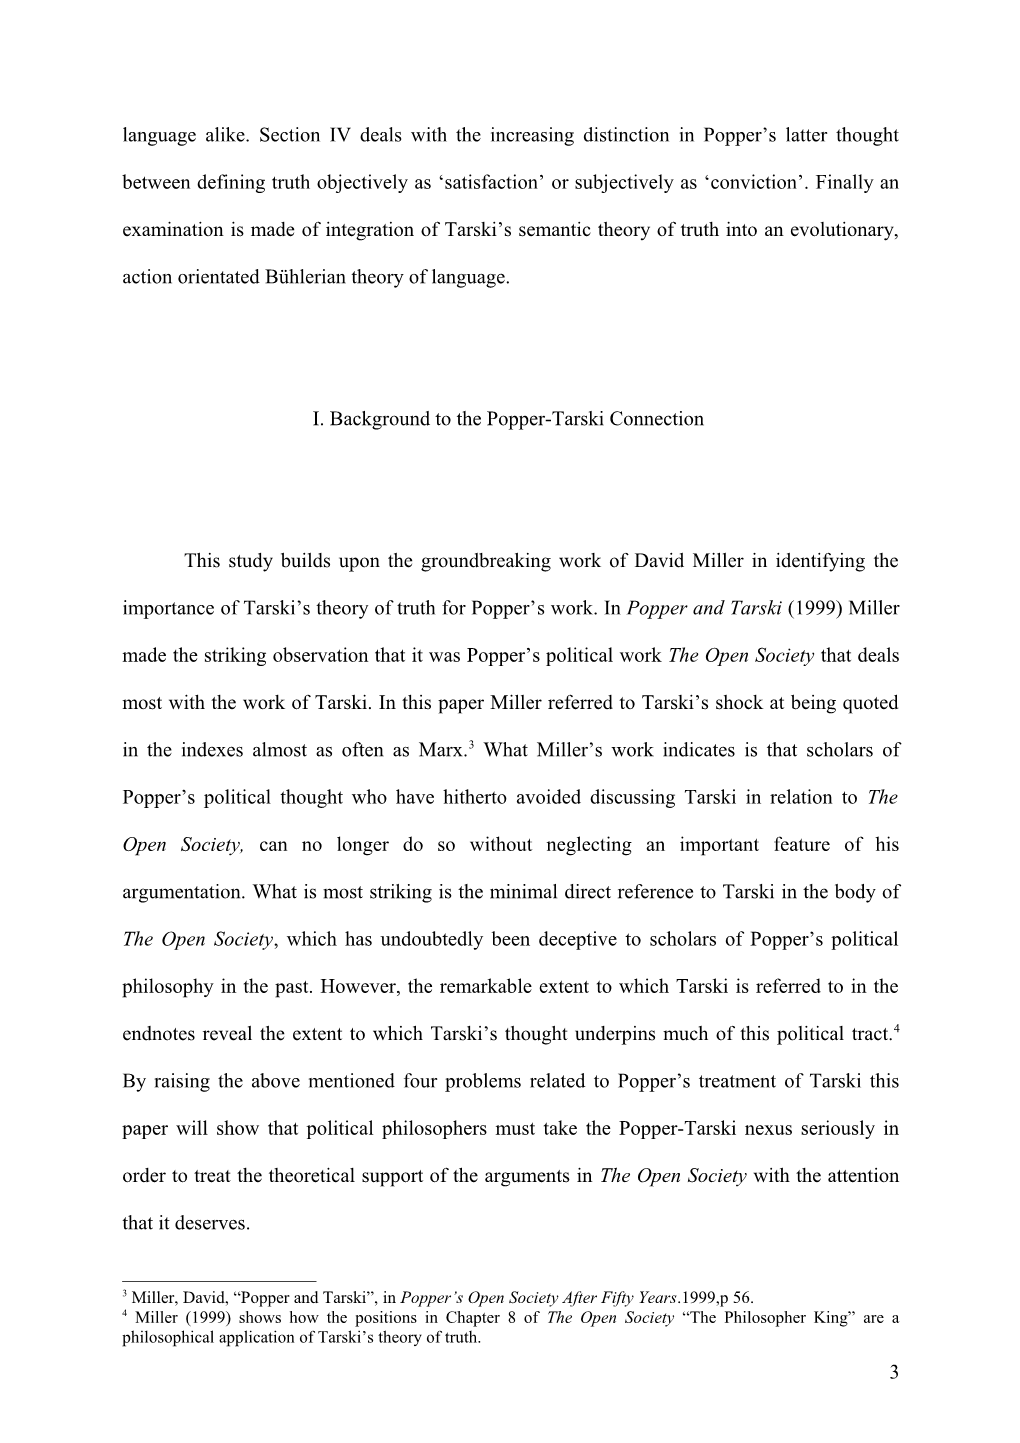 Karl Popper, Alfred Tarski and Problems Concerning the Correspondence Theory of Truth